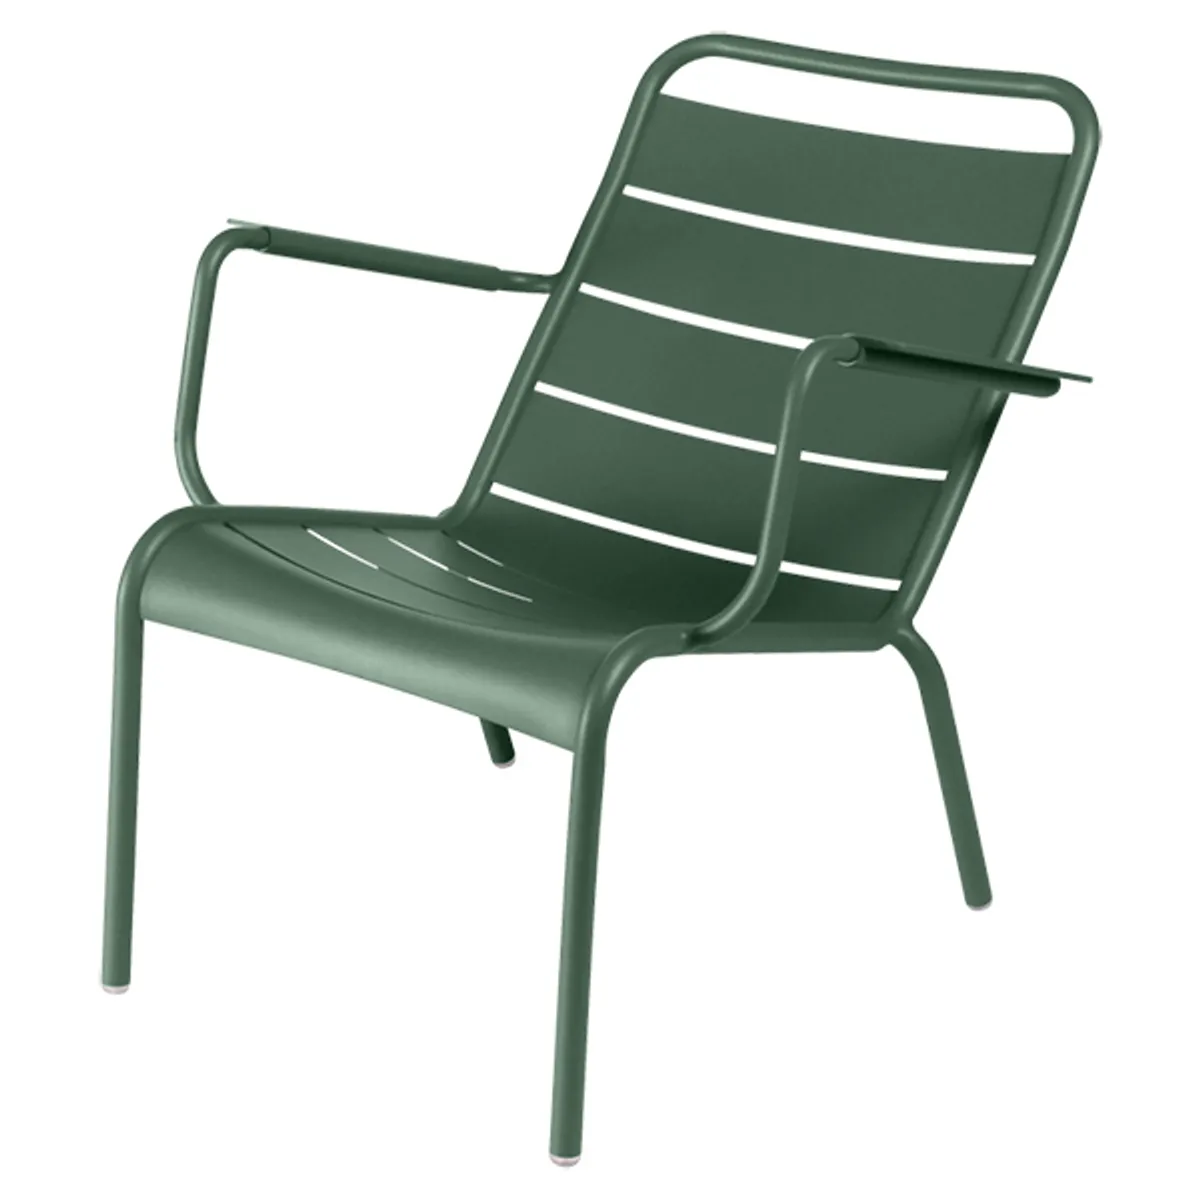 Luxembourg Lounge Chair For Outdoor Use Cedar